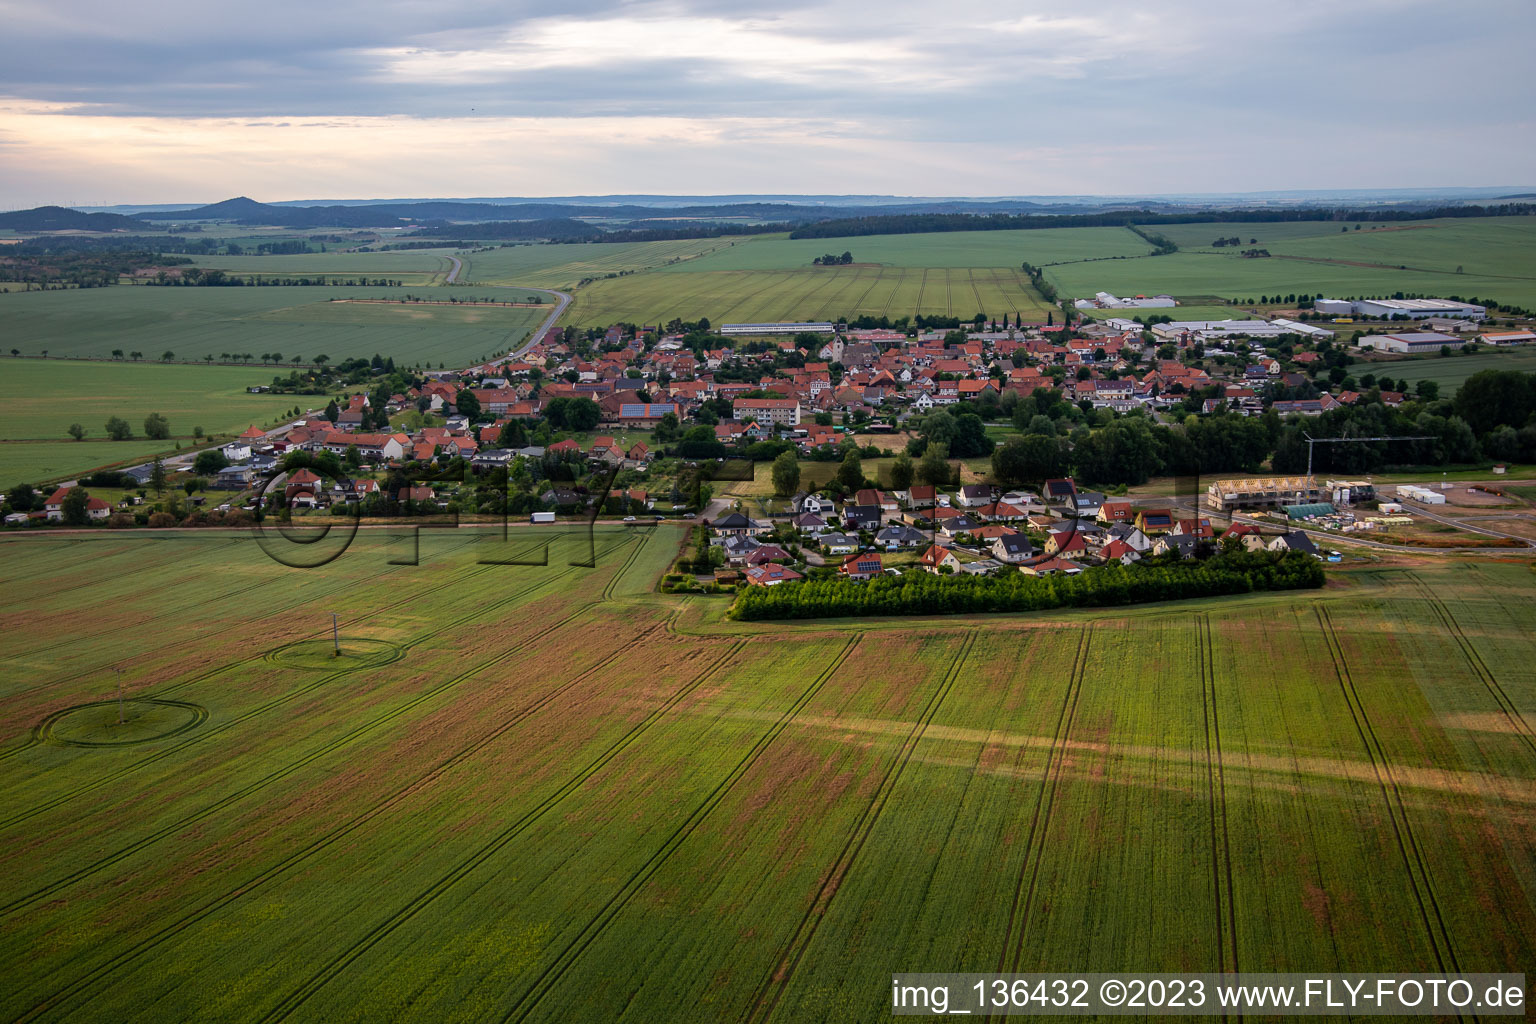 From the south in the district Warnstedt in Thale in the state Saxony-Anhalt, Germany